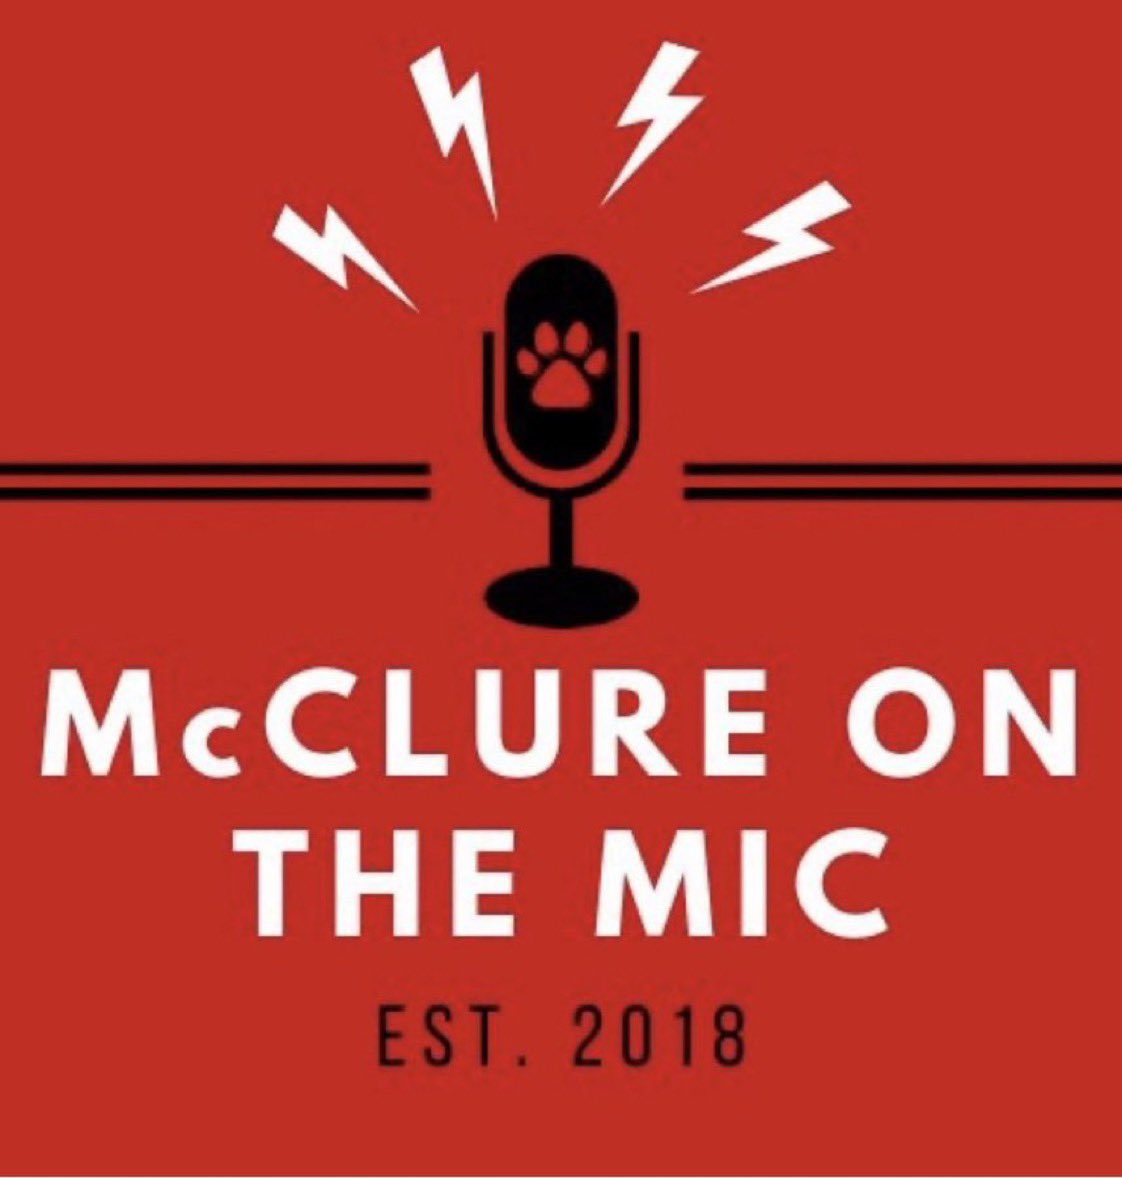 This week we focused on everything that is Super! We've got stories about the Bowl, super heroes, super people and the work they do, and more. @mfumarolo @wssd101 #mcbulldogs #mcbulldogs101 #wsd101 #podcast  d101.org/101podcast/?